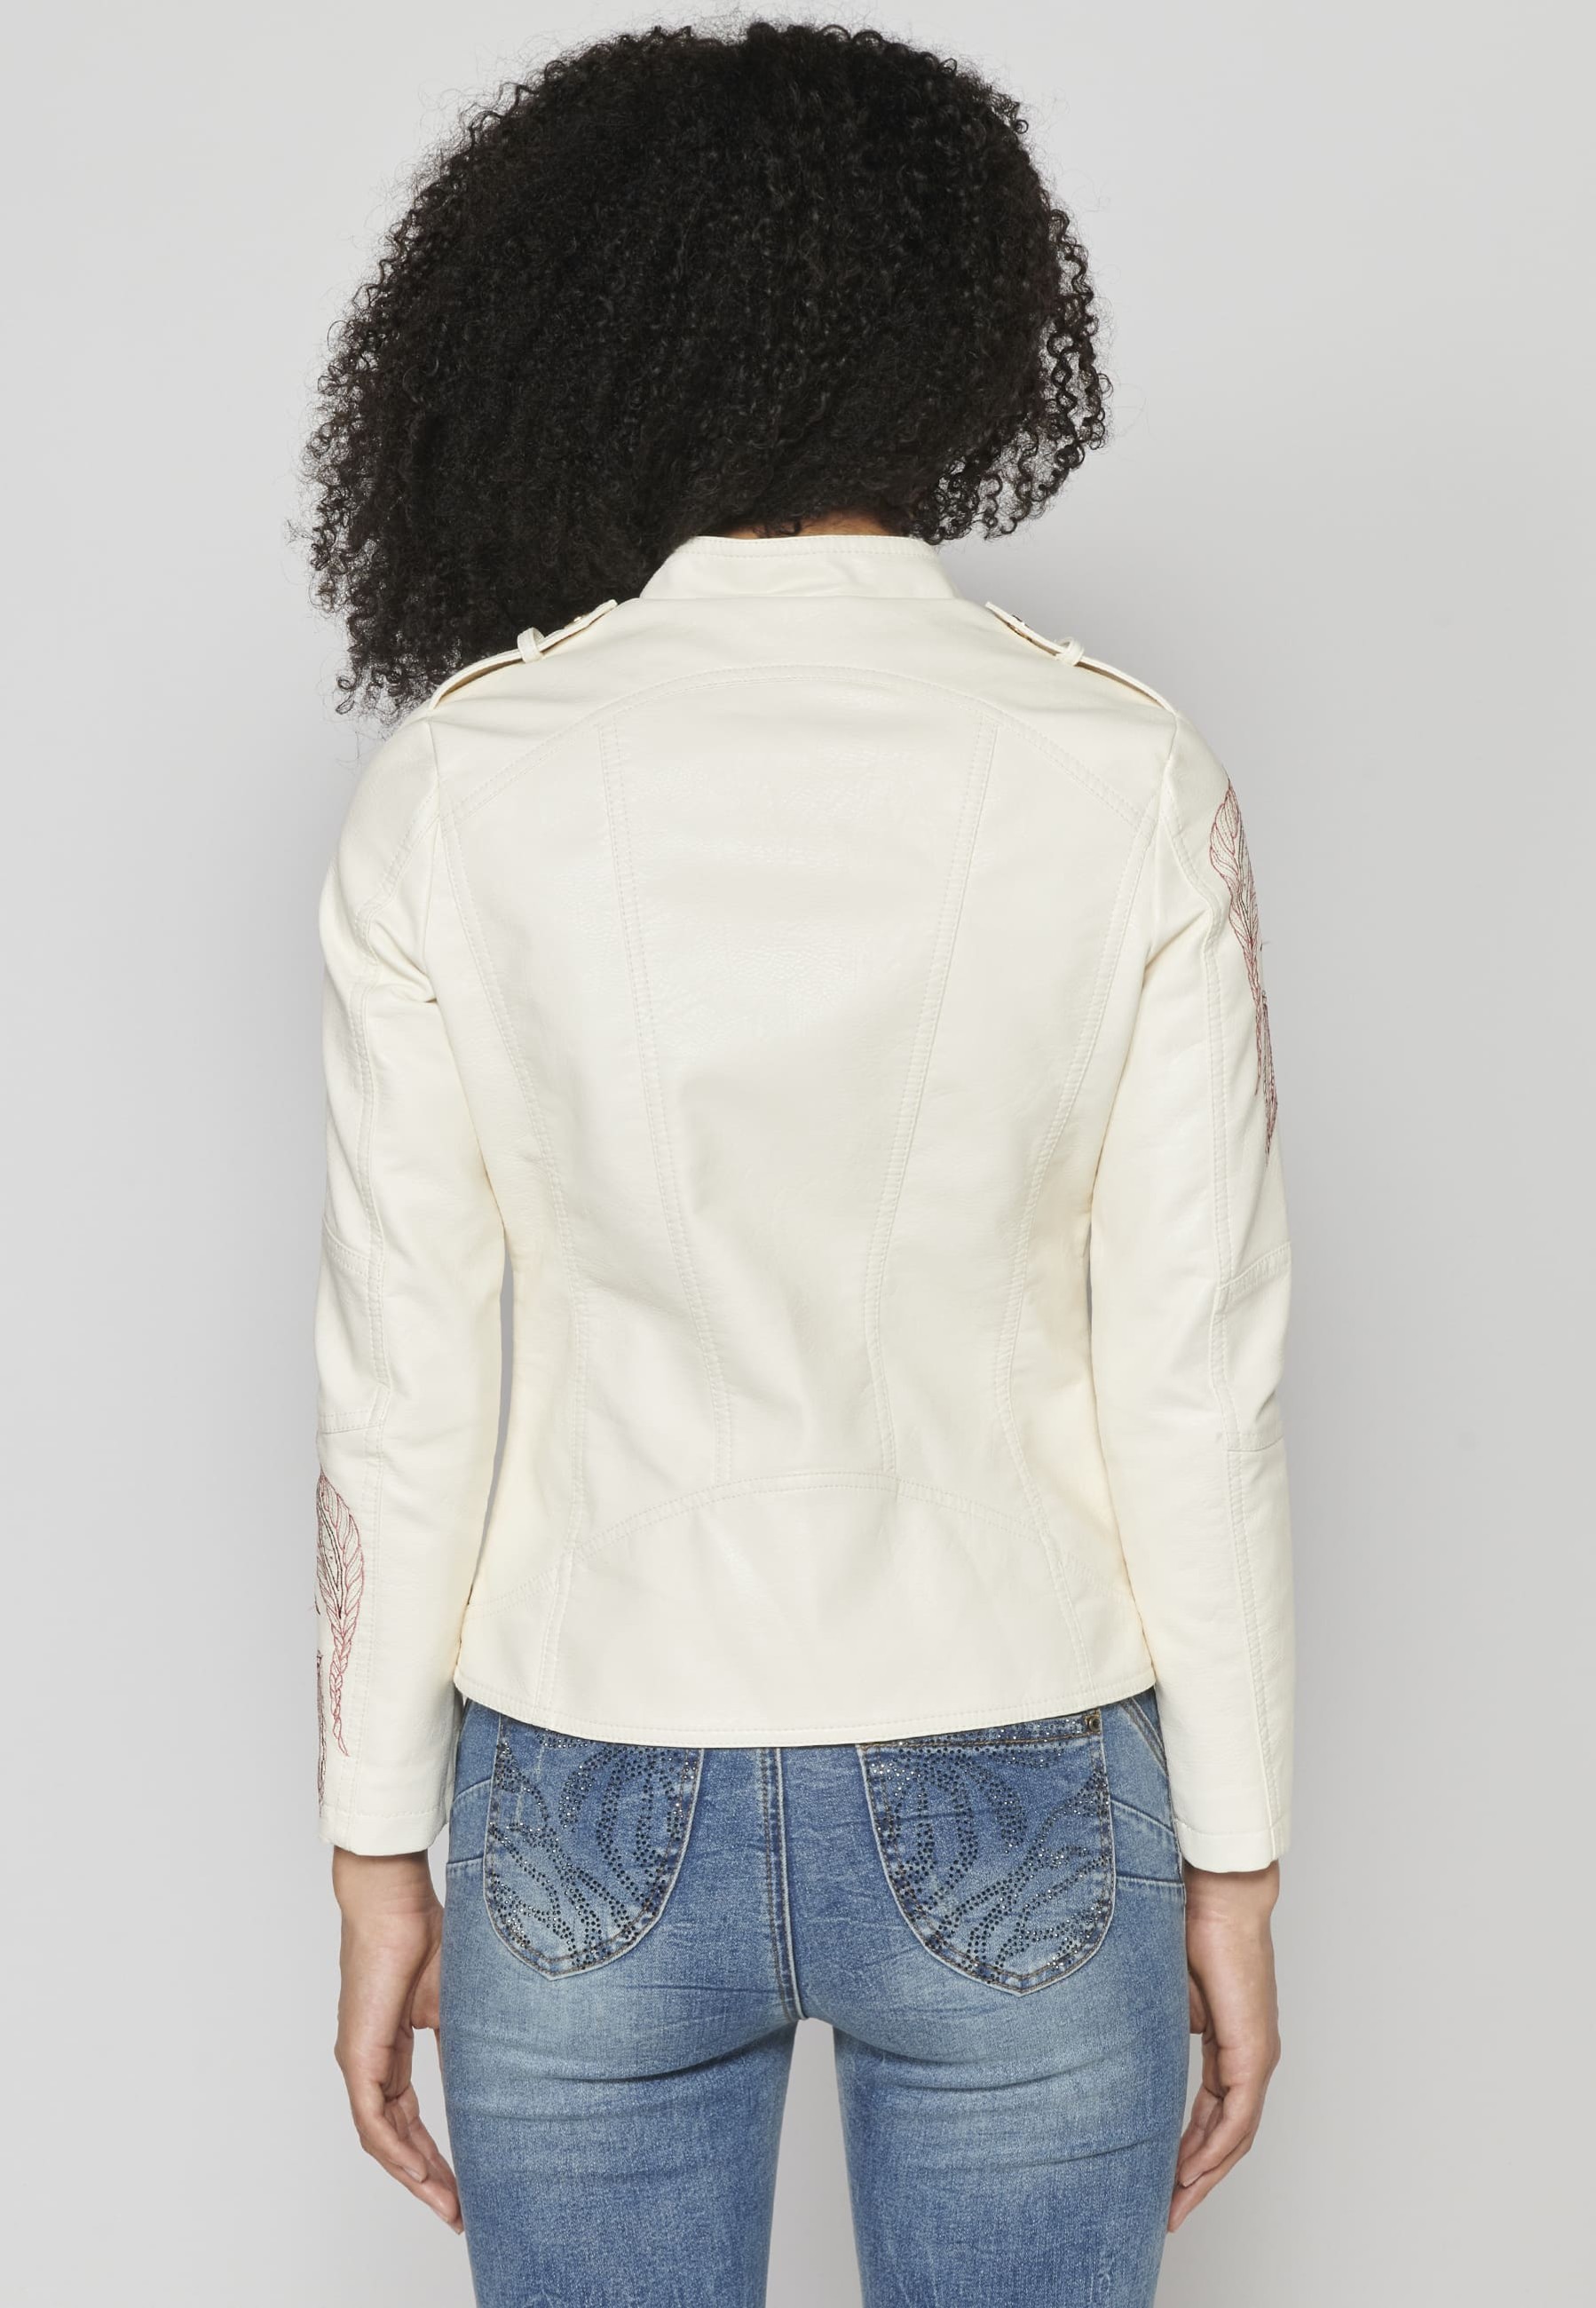 Women's leather-effect jacket with embroidered details